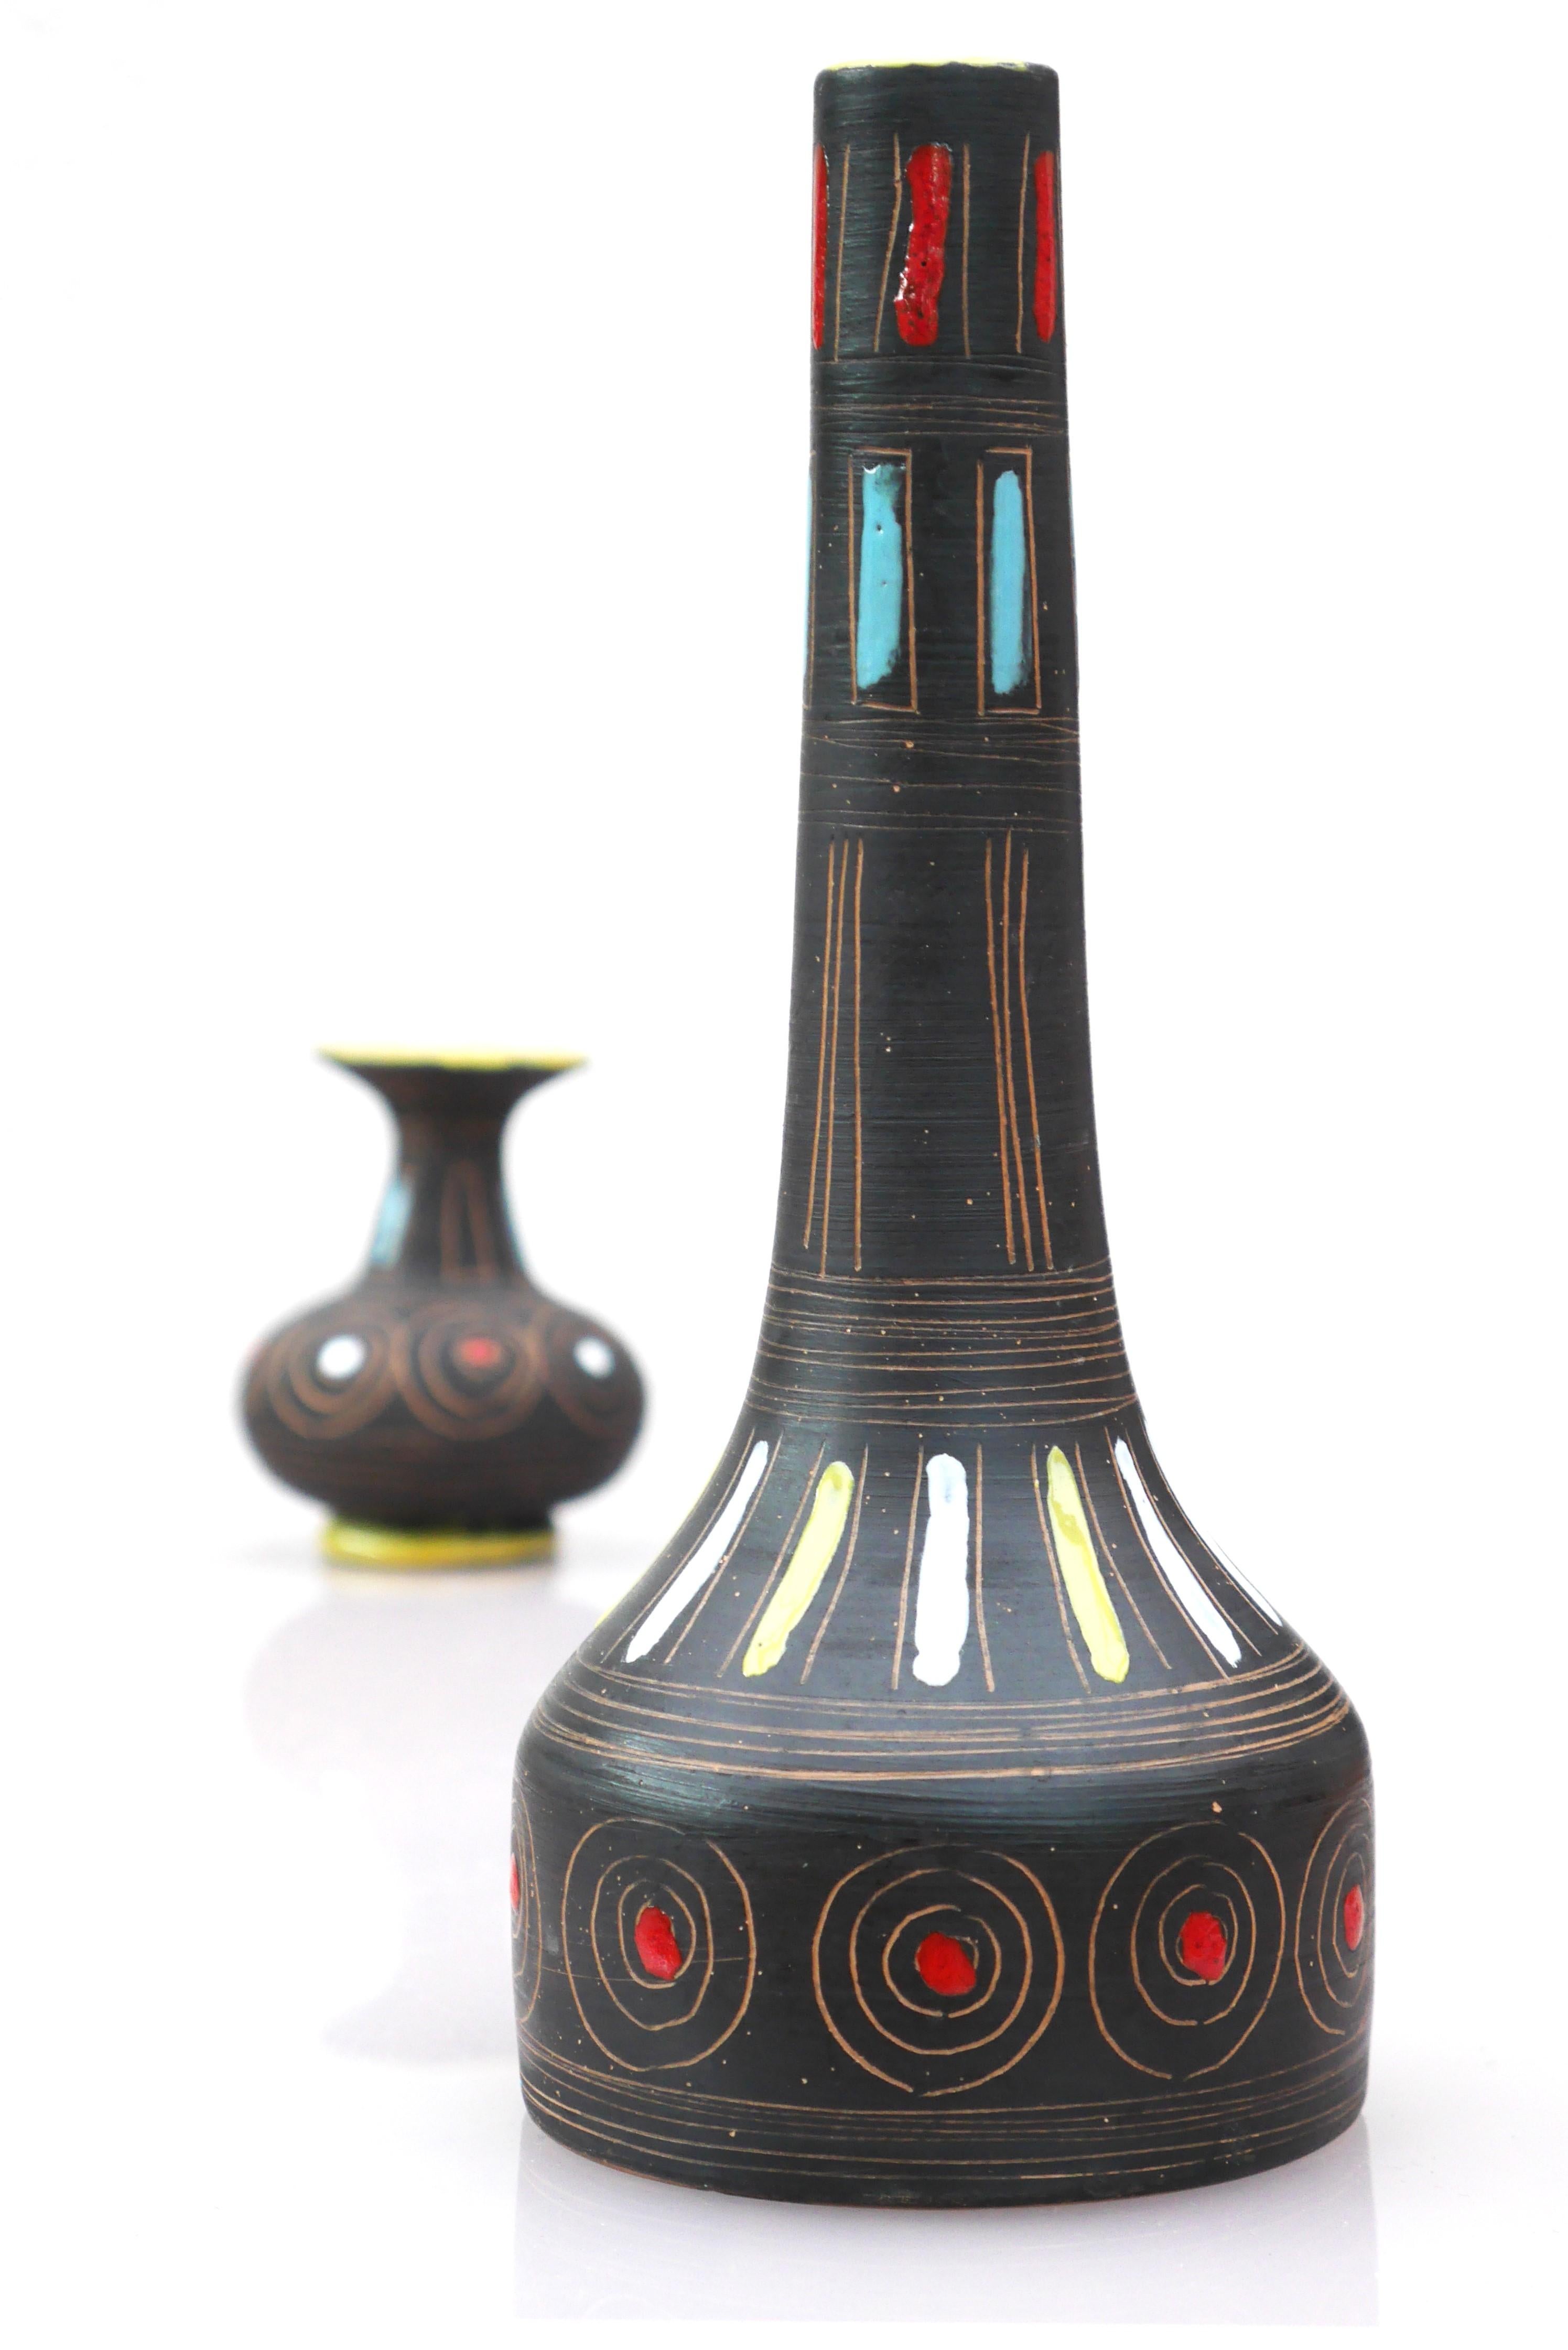 A pair of Mid-century modern pottery vases, by Fratelli Fanciullacci , Italy. 1